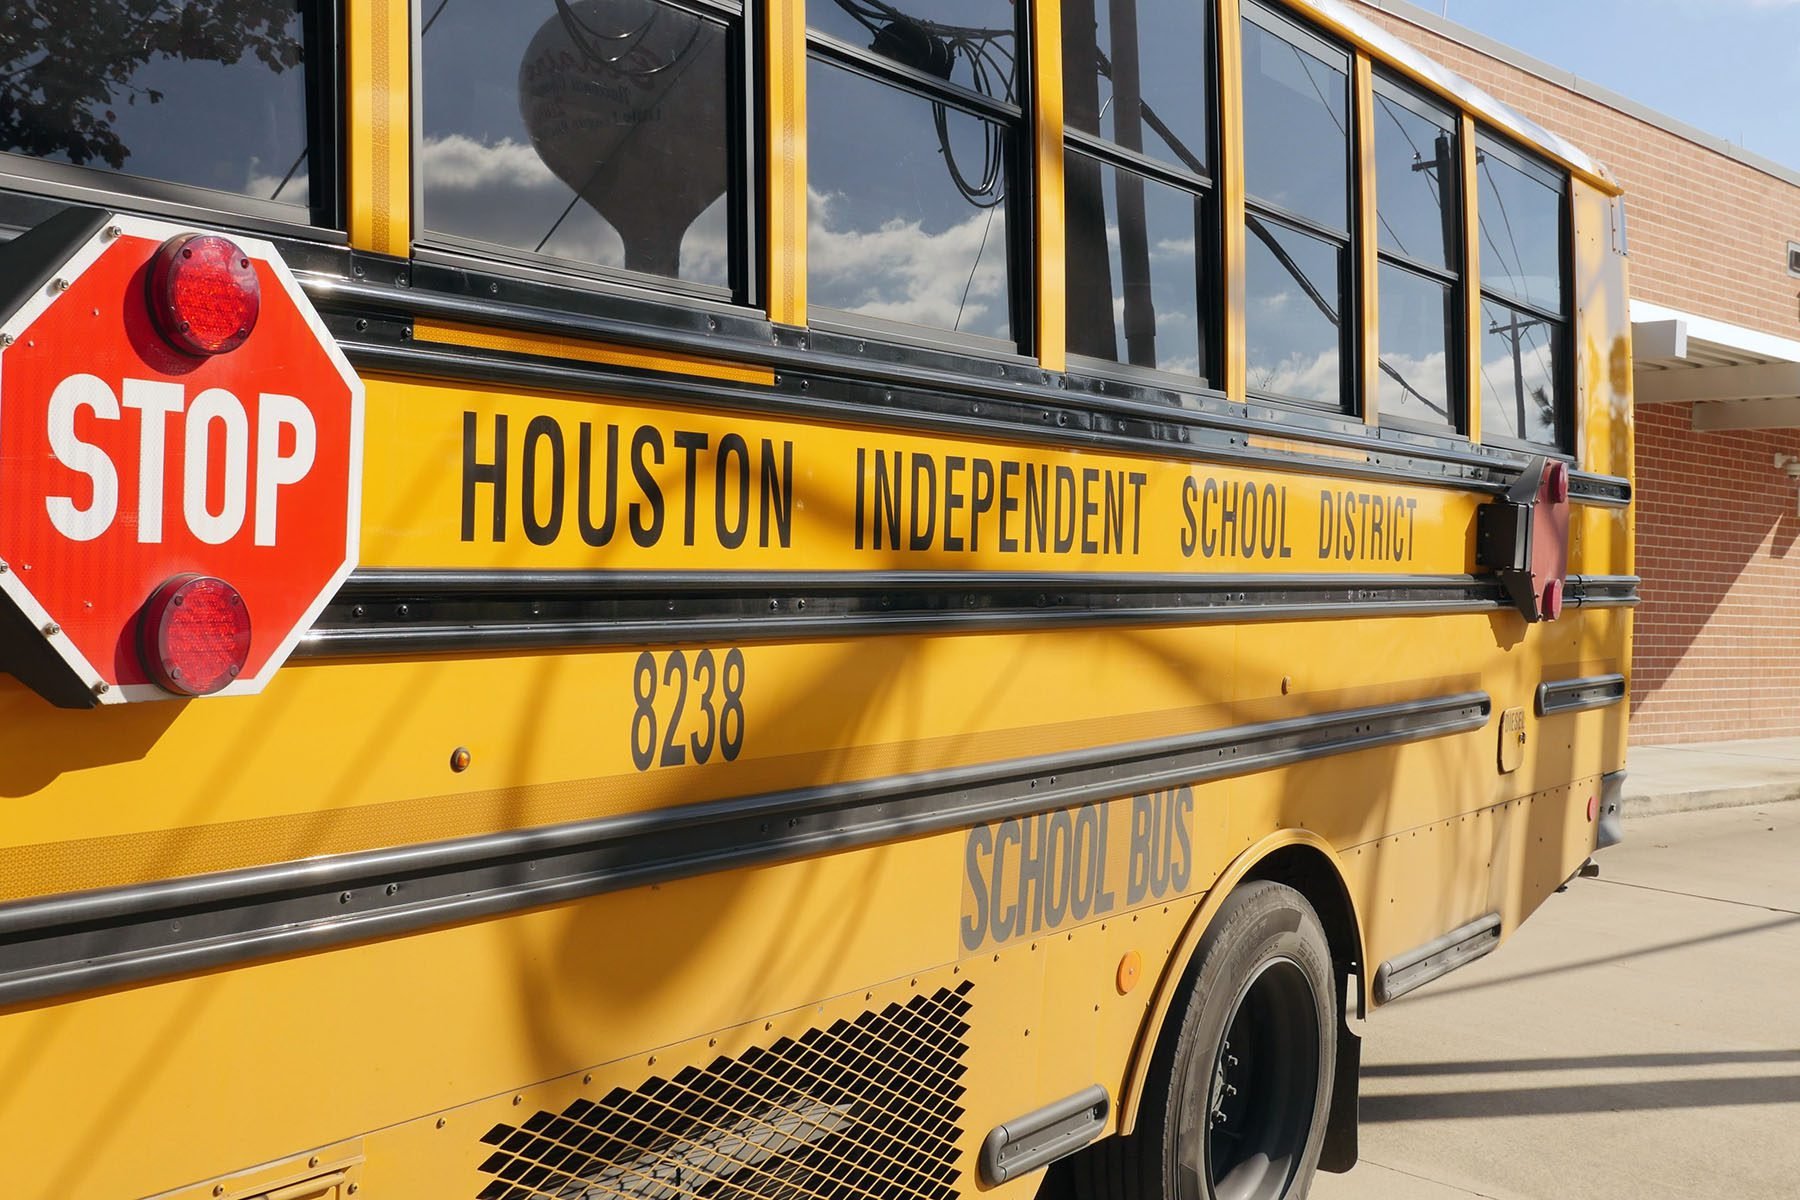 Houston public schools takeover would oust diverse school board pic